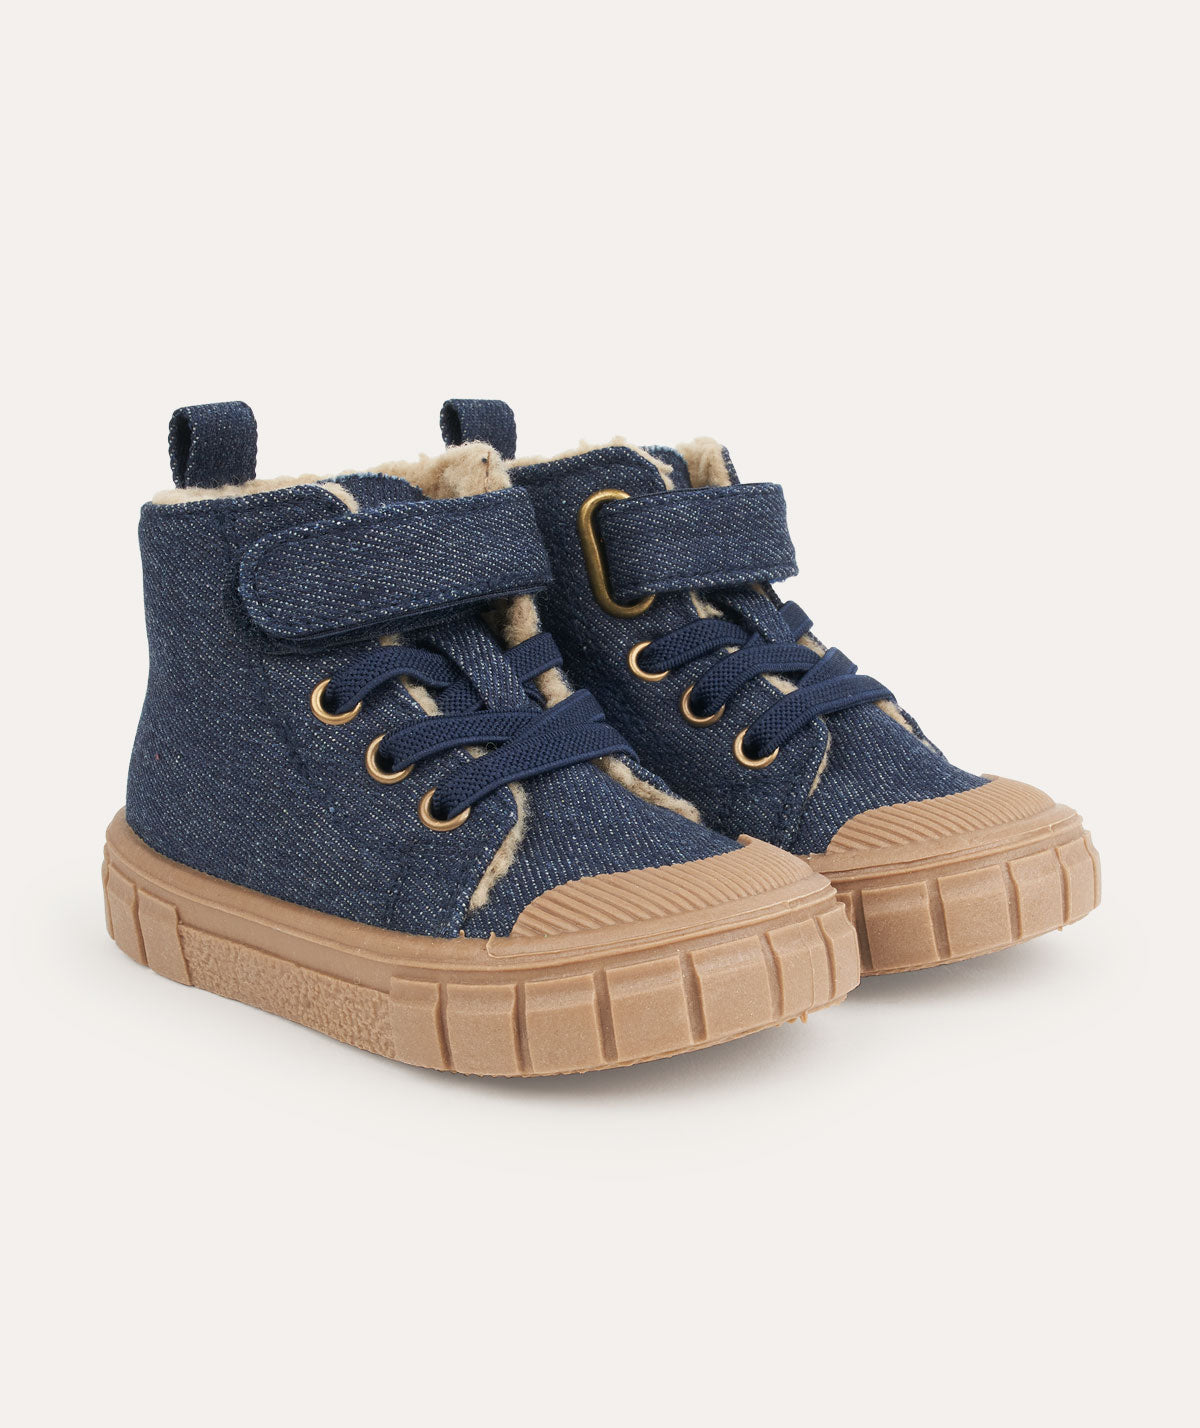 Buy the KIDLY Label Denim High Top Trainers online at KIDLY